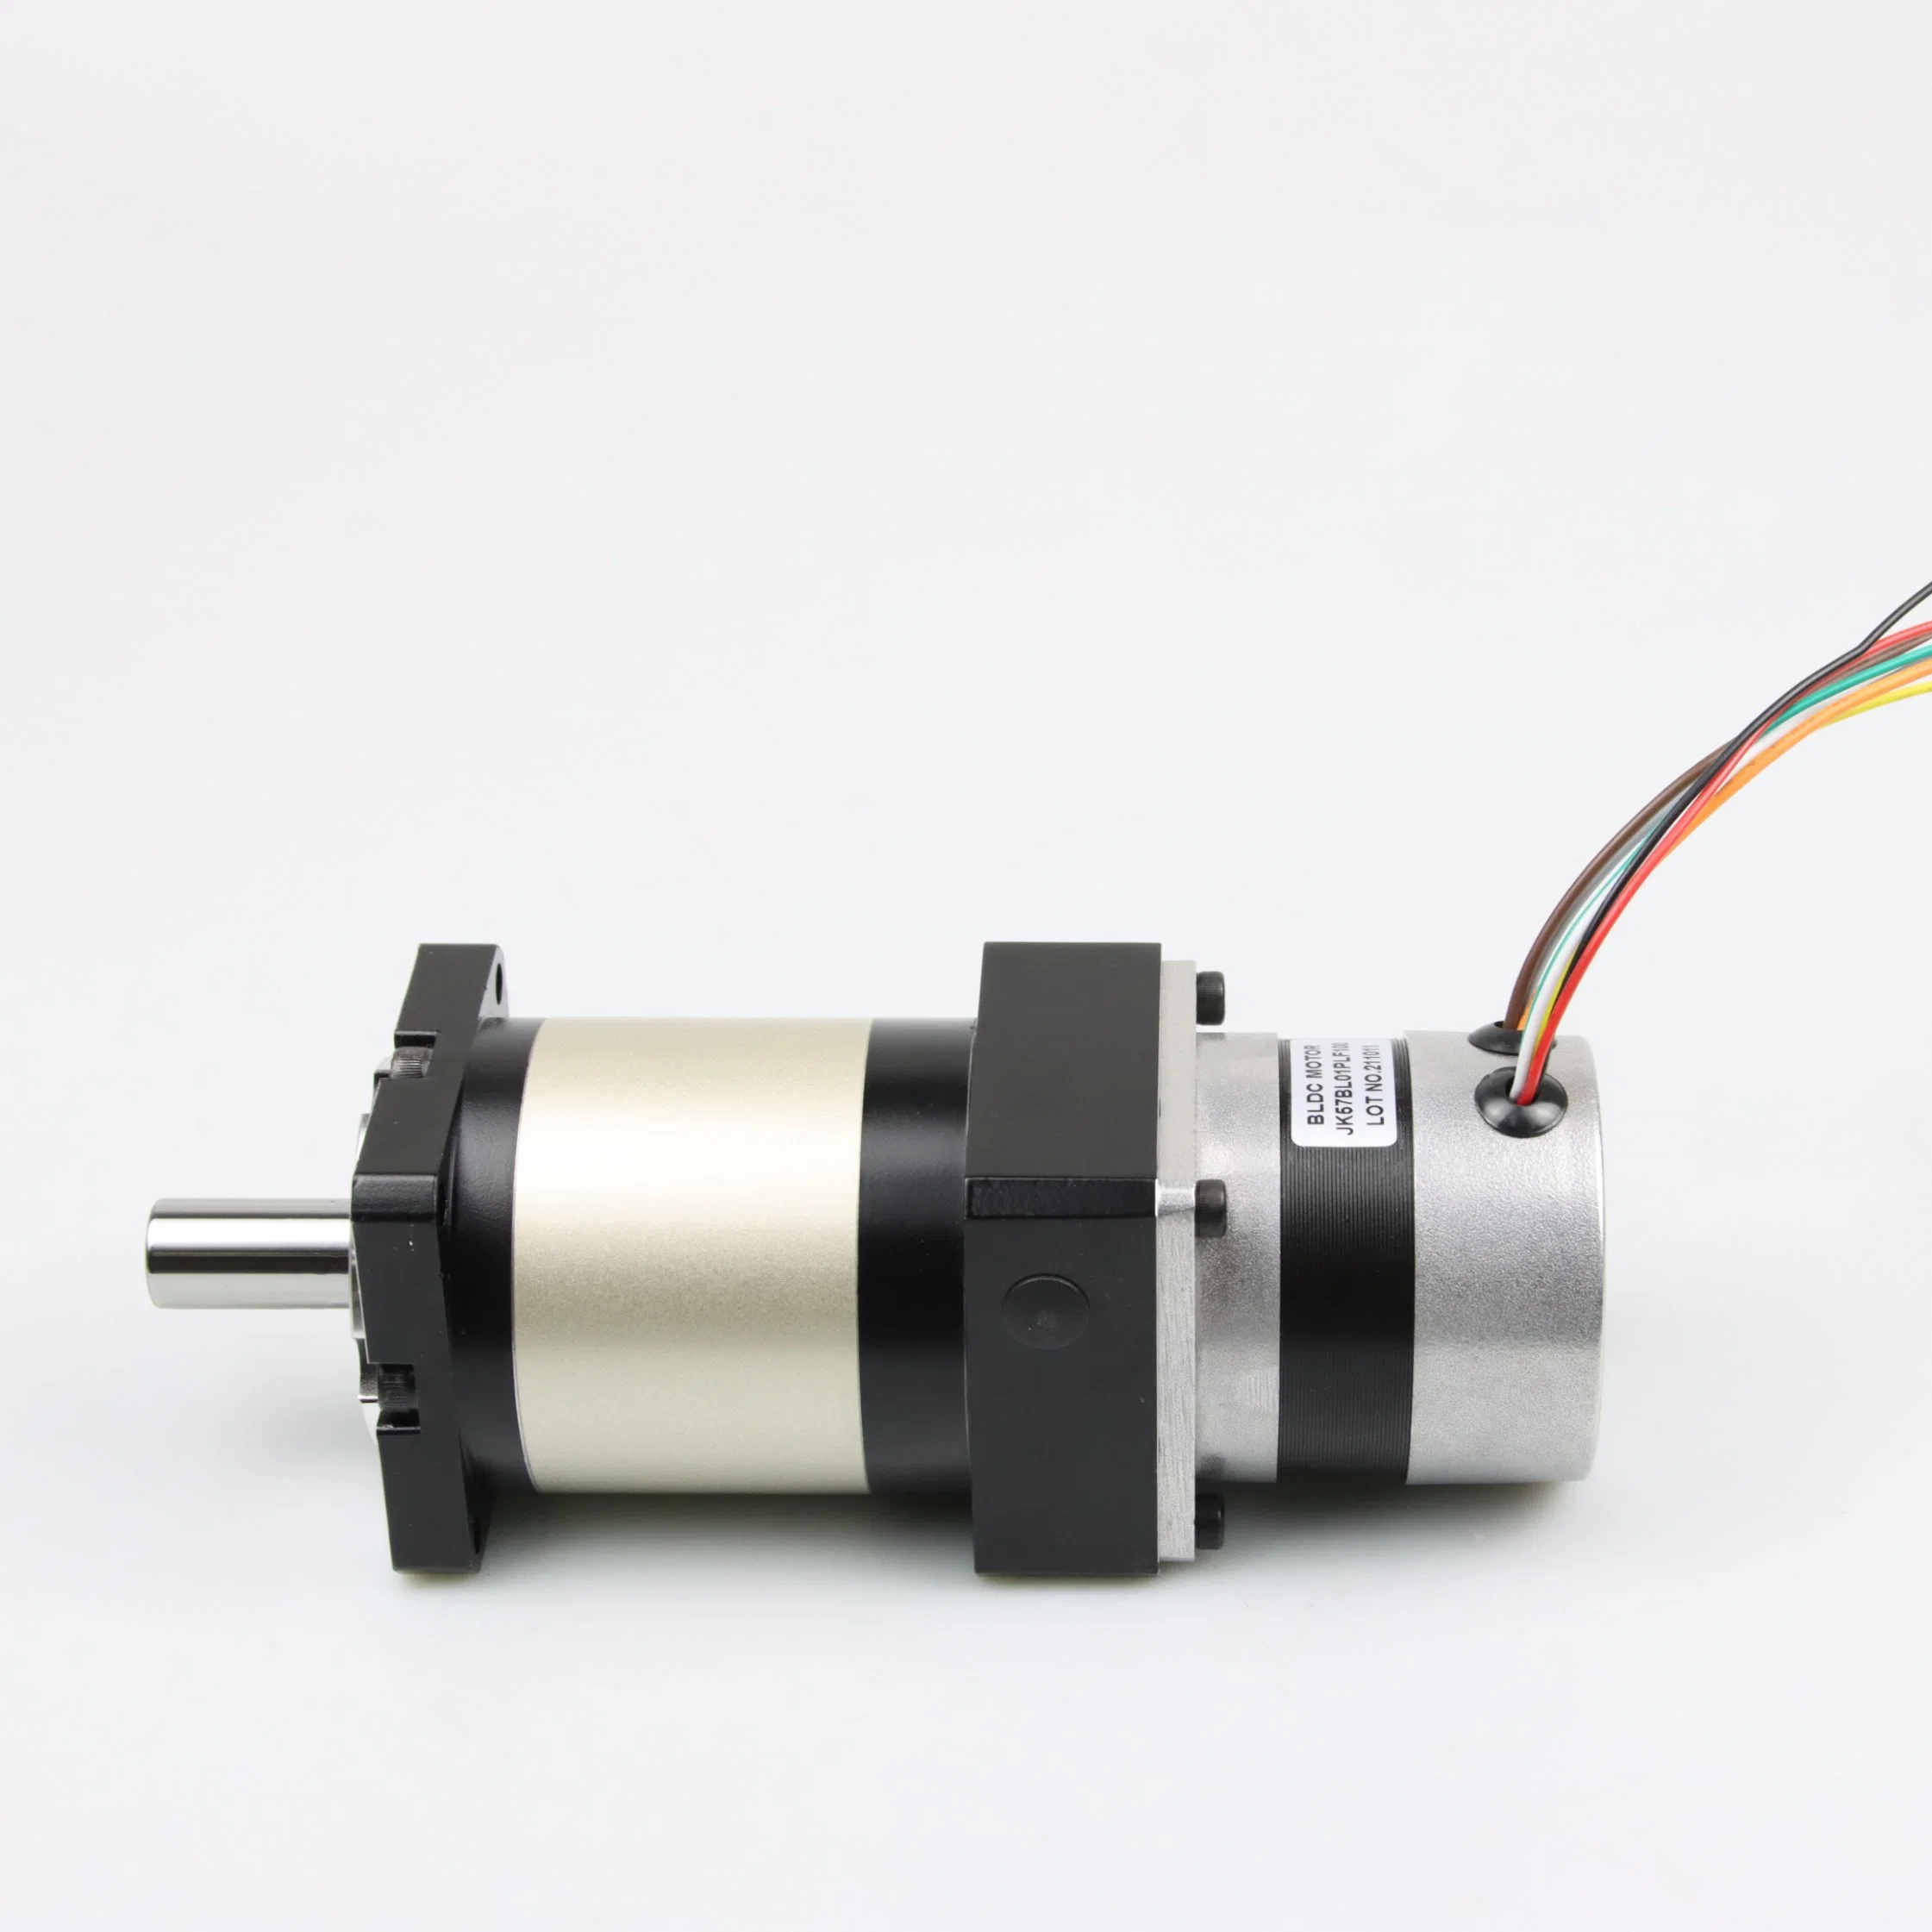 NEMA23 57mm BLDC Brushless DC Motor 2500rpm 28.8W with Gearbox 1: 100 High Holding Torque